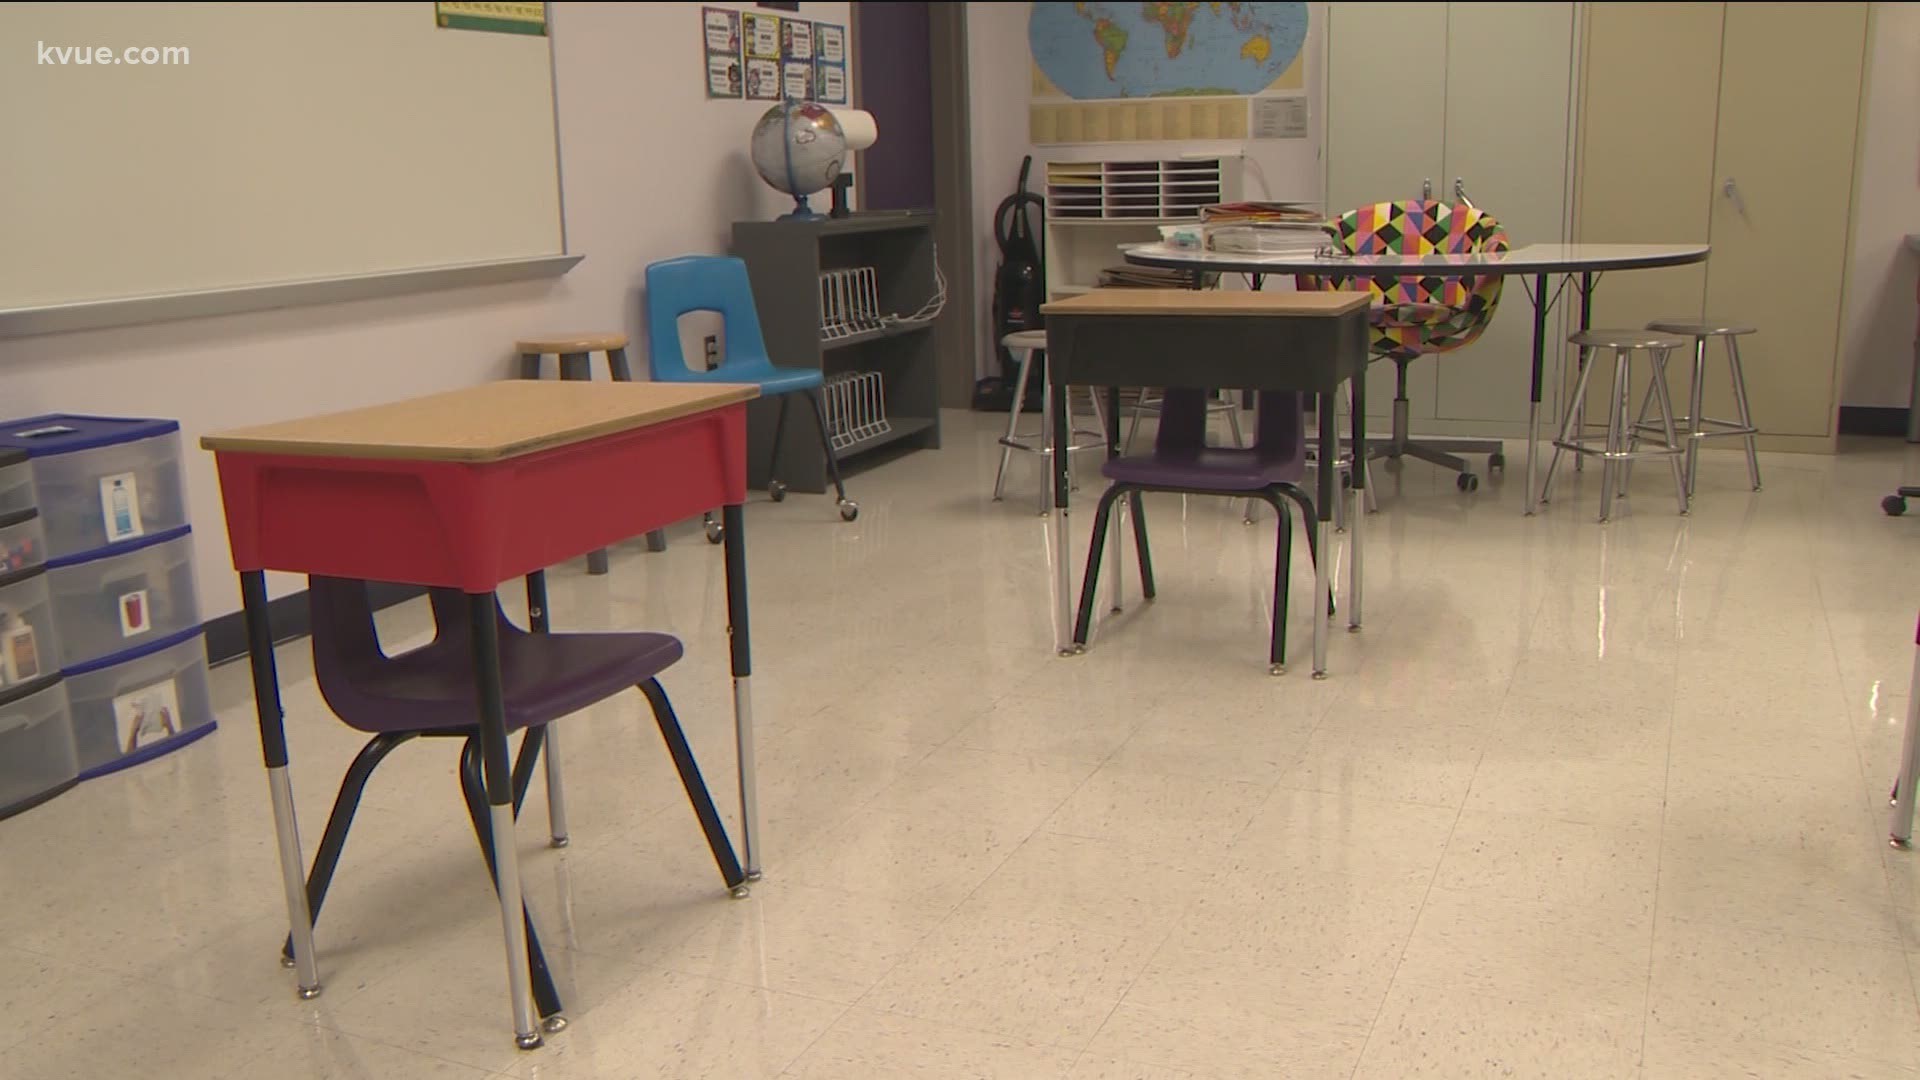 In just a few days, Thrall ISD will reopen classrooms. Mari Salazar gives us an exclusive look at what the classrooms will look like.